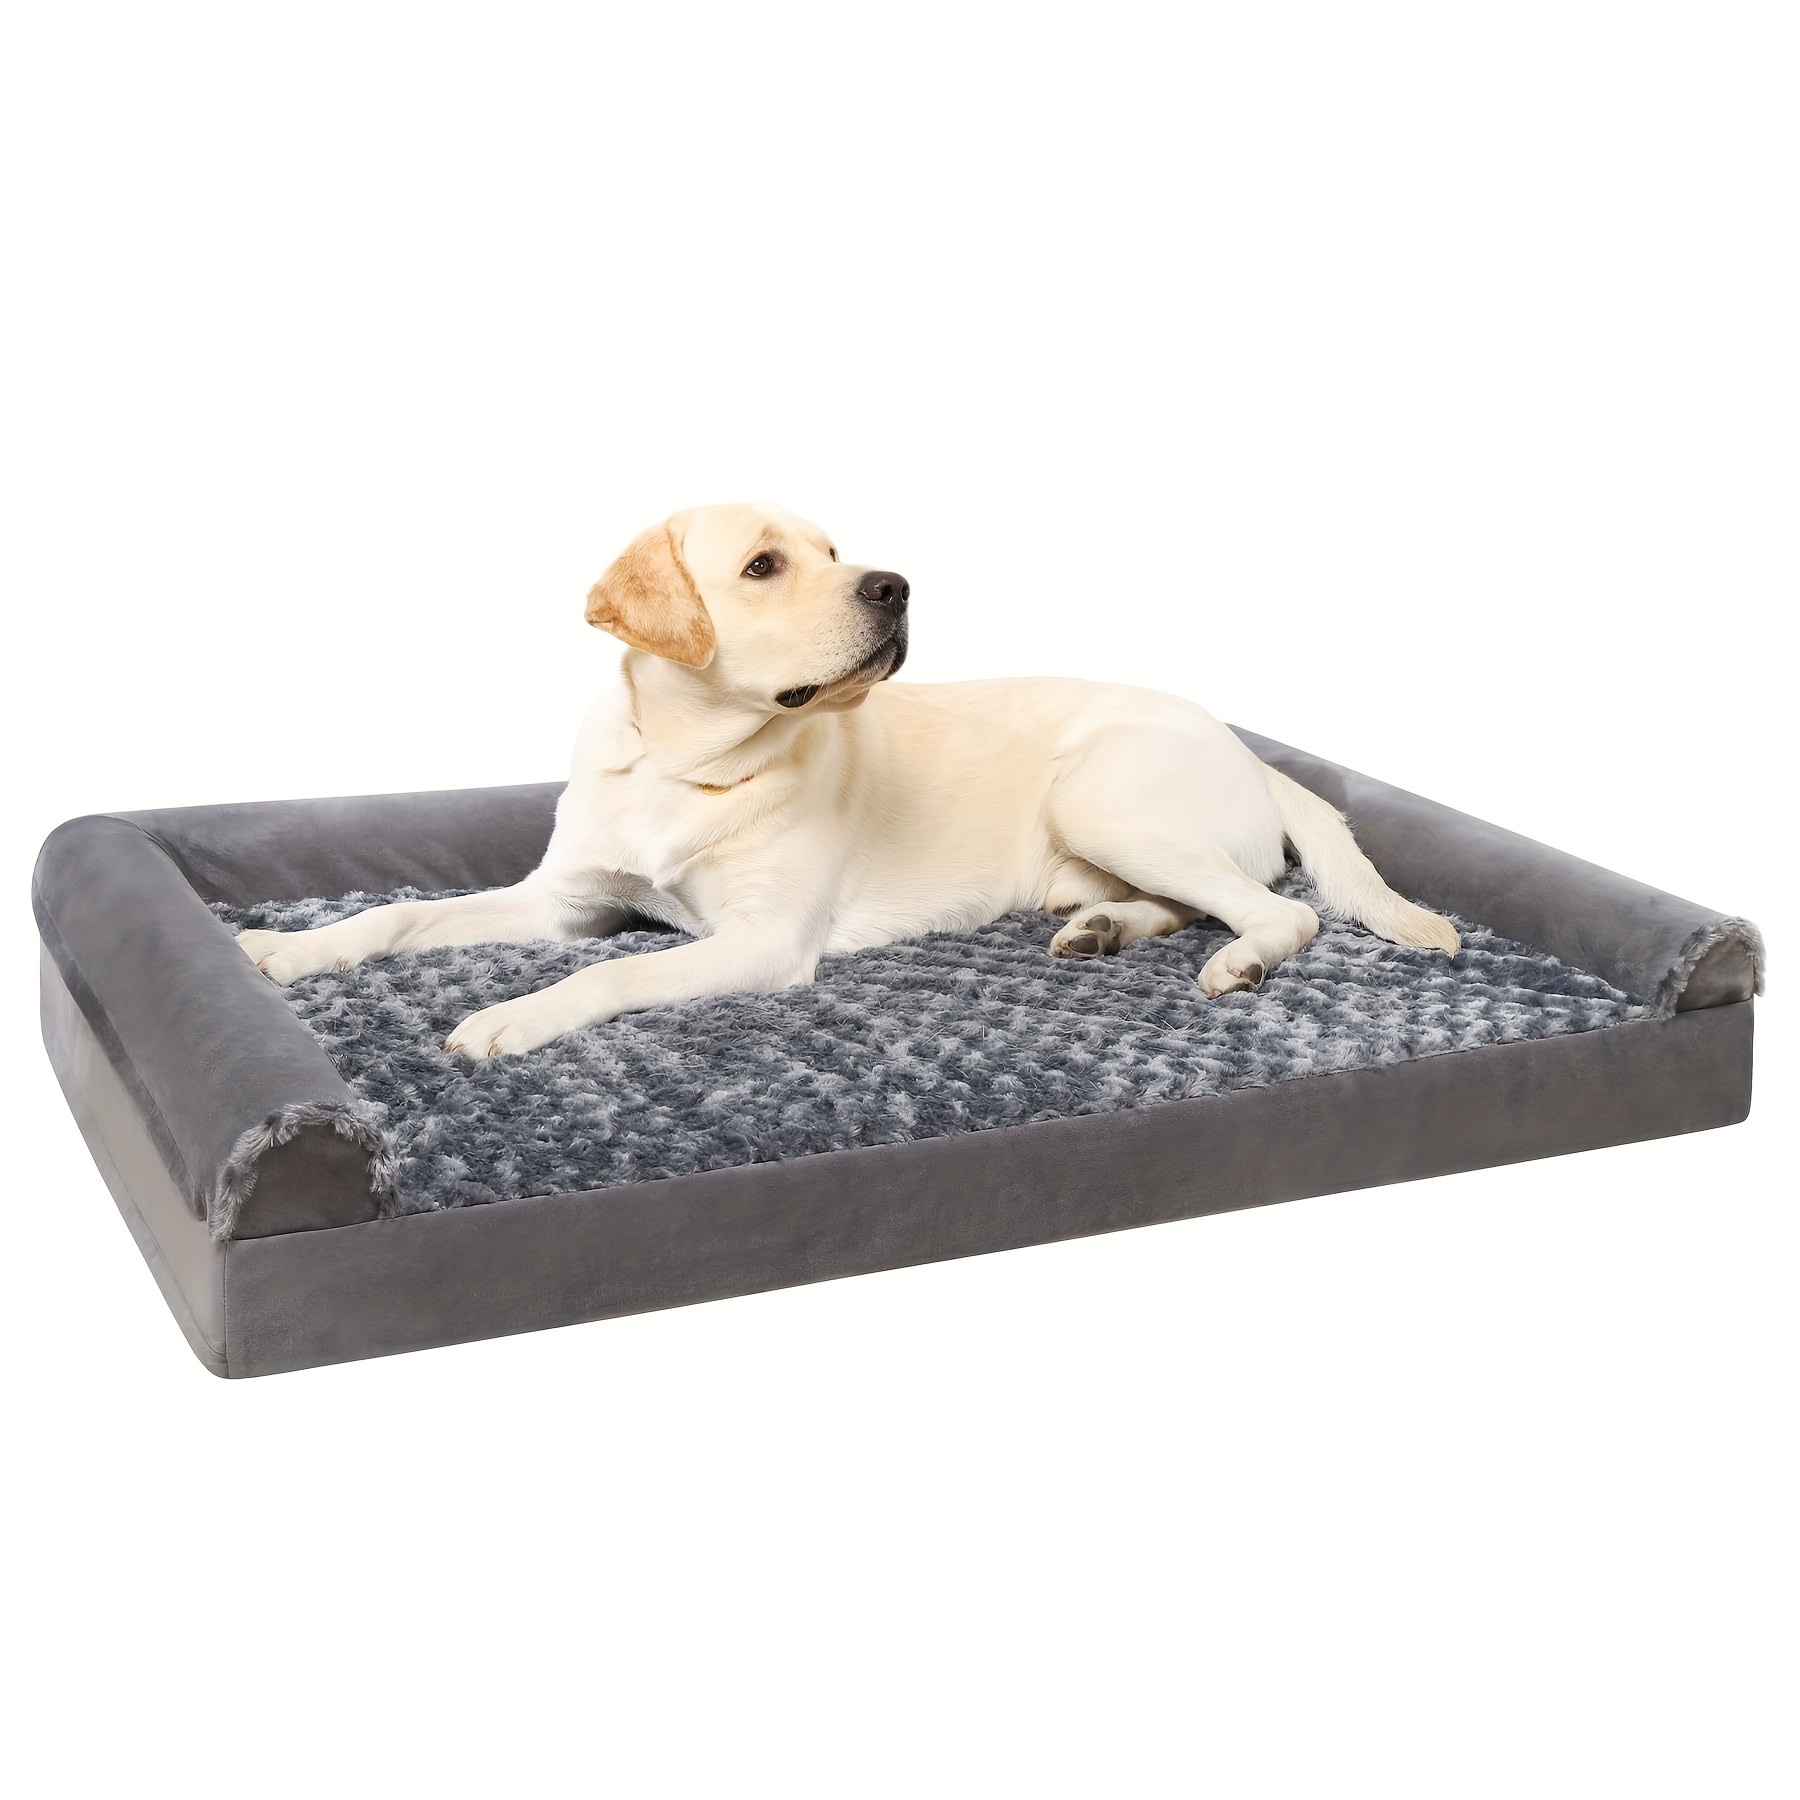 

Orthopedic Dog Beds For Large Dogs, Extra Large Waterproof Dog Bed With Removable Washable Cover & Anti-slip Bottom, Pet Bed Mat